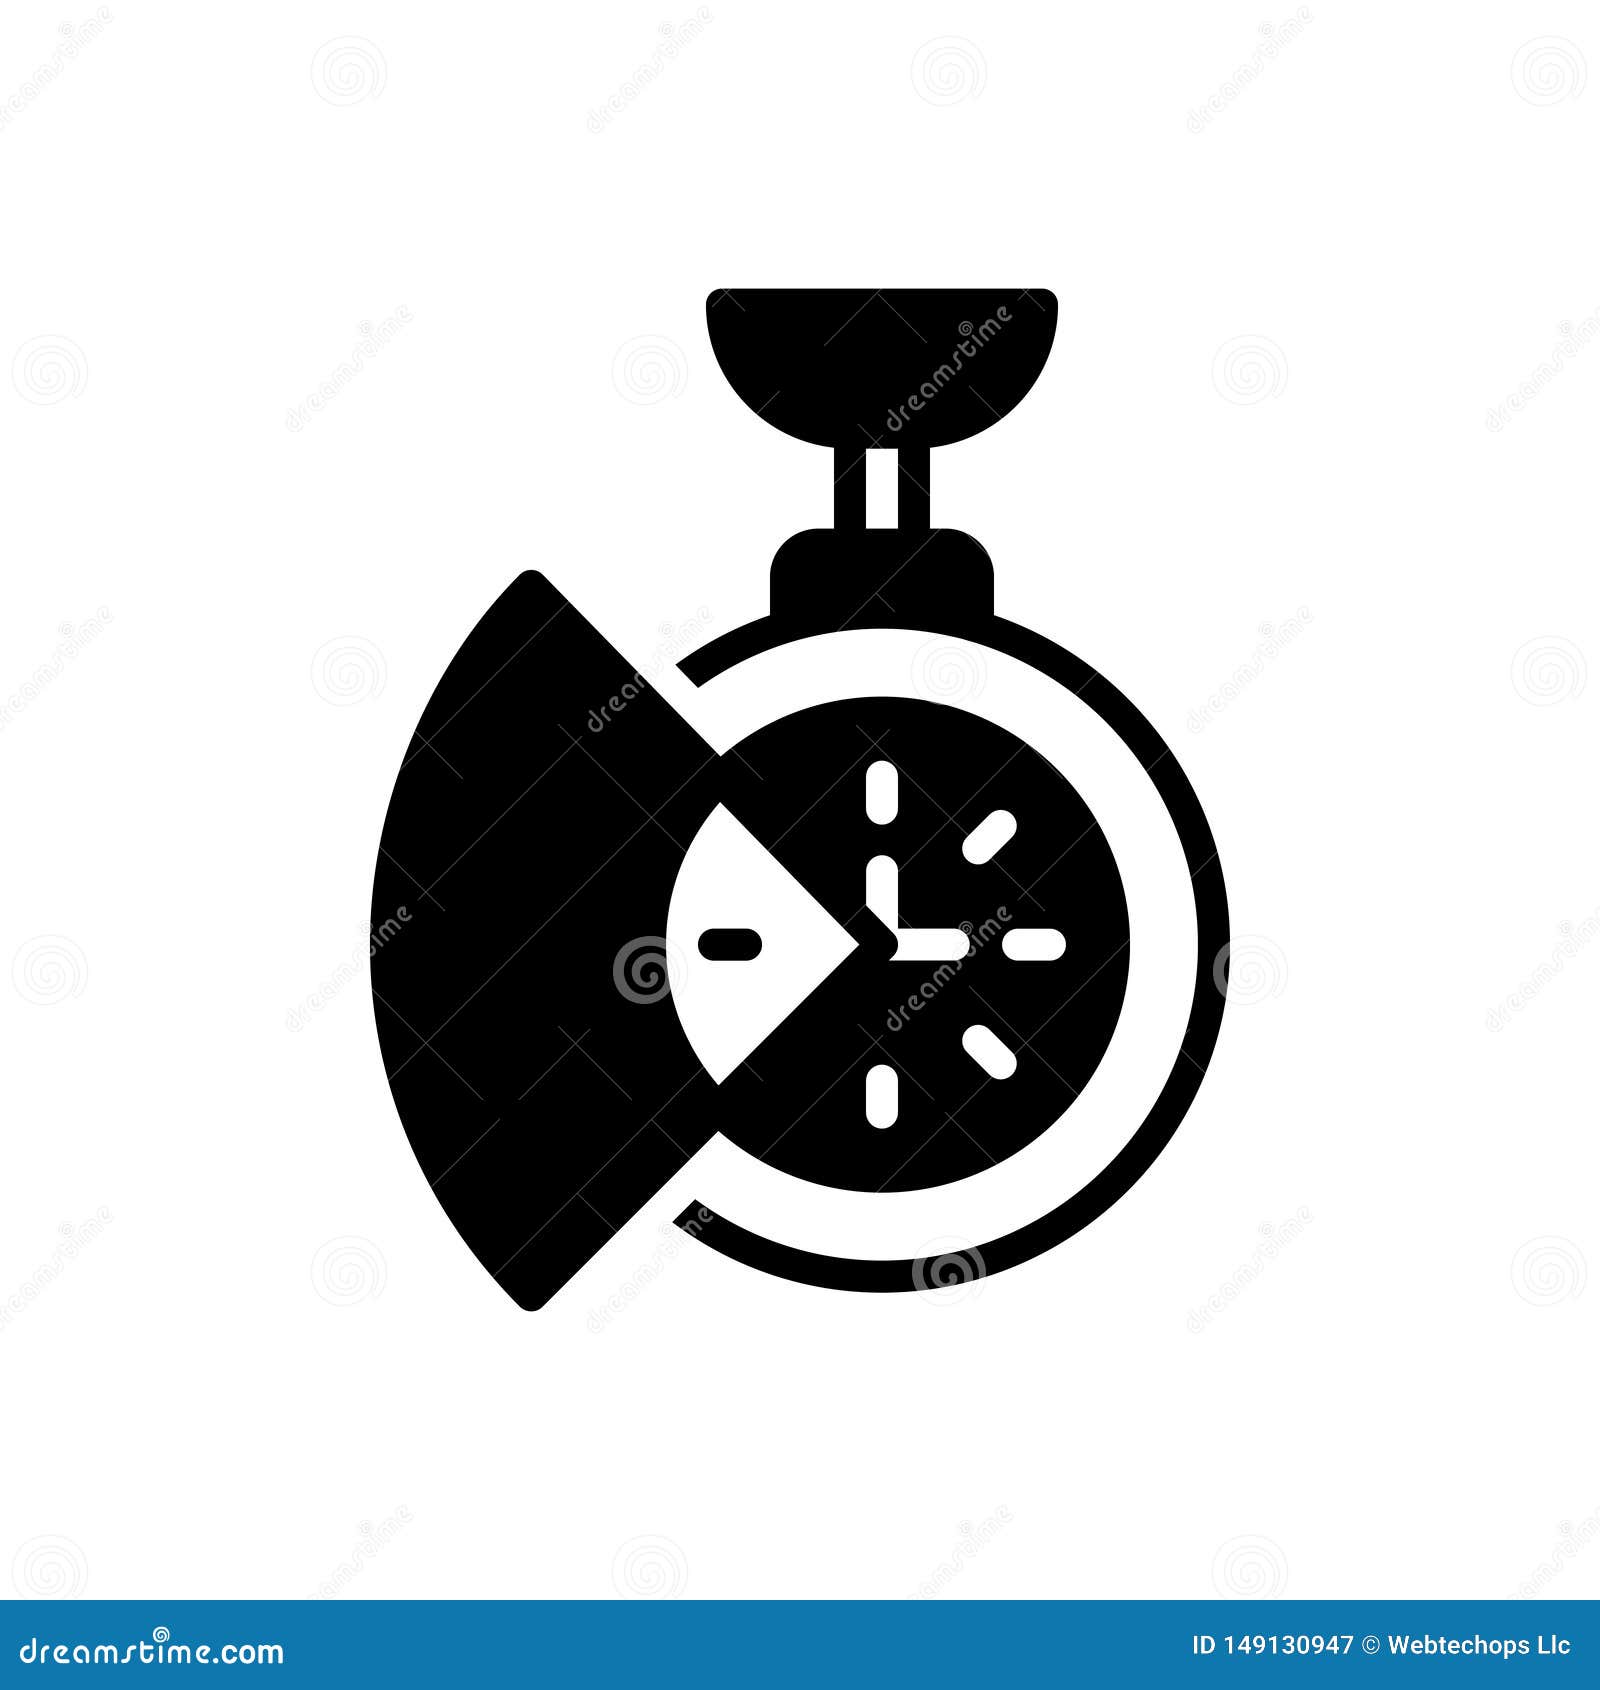 black solid icon for time saving, reminder and clock